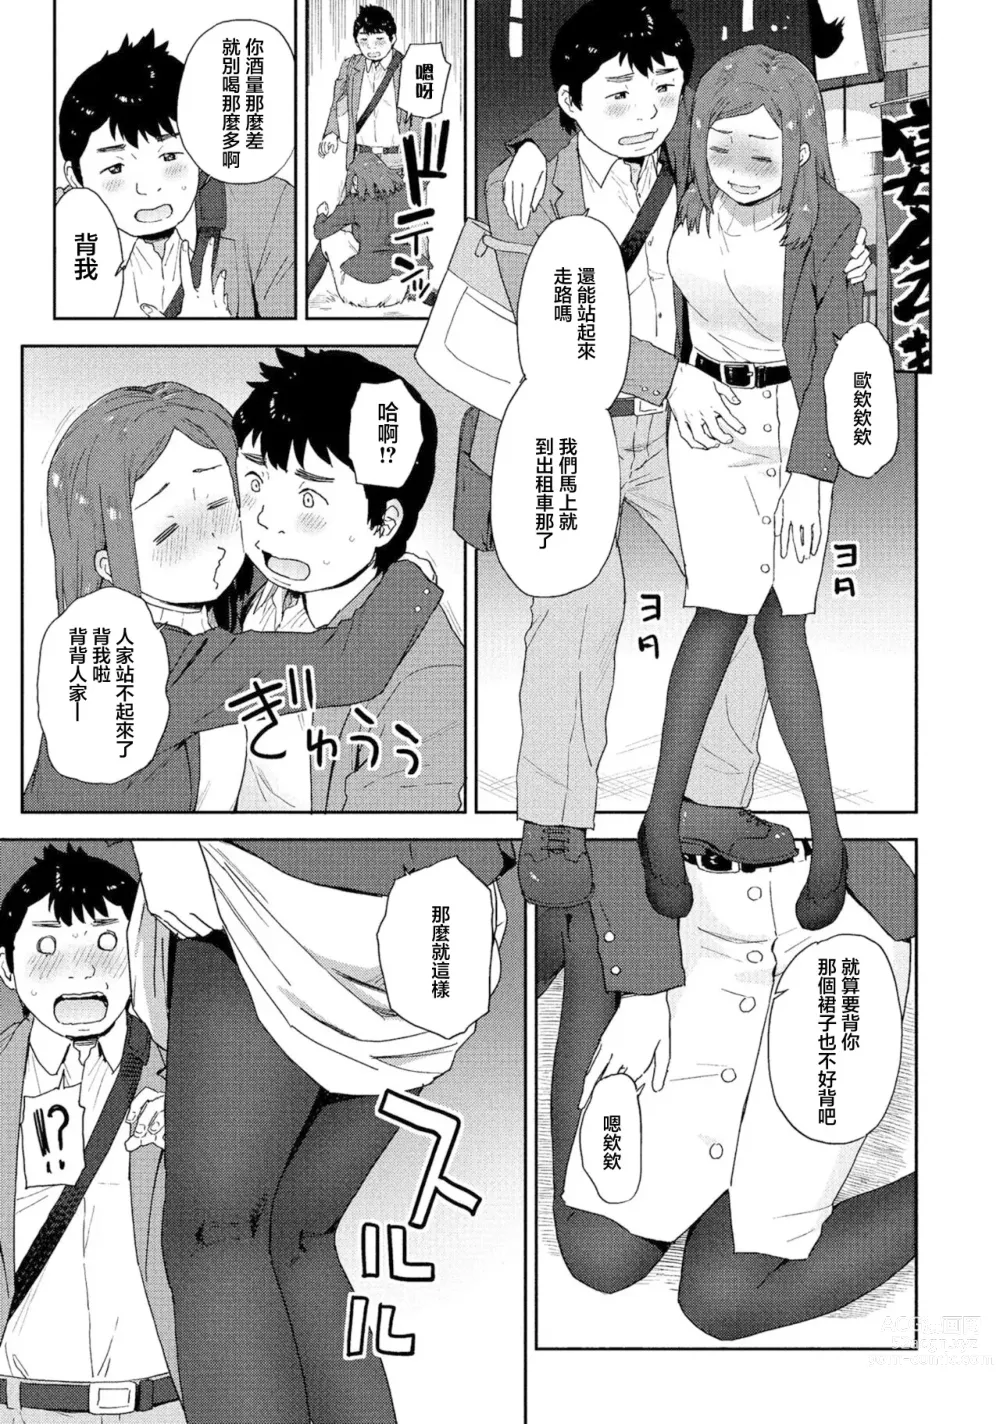 Page 7 of doujinshi 可靠依賴性